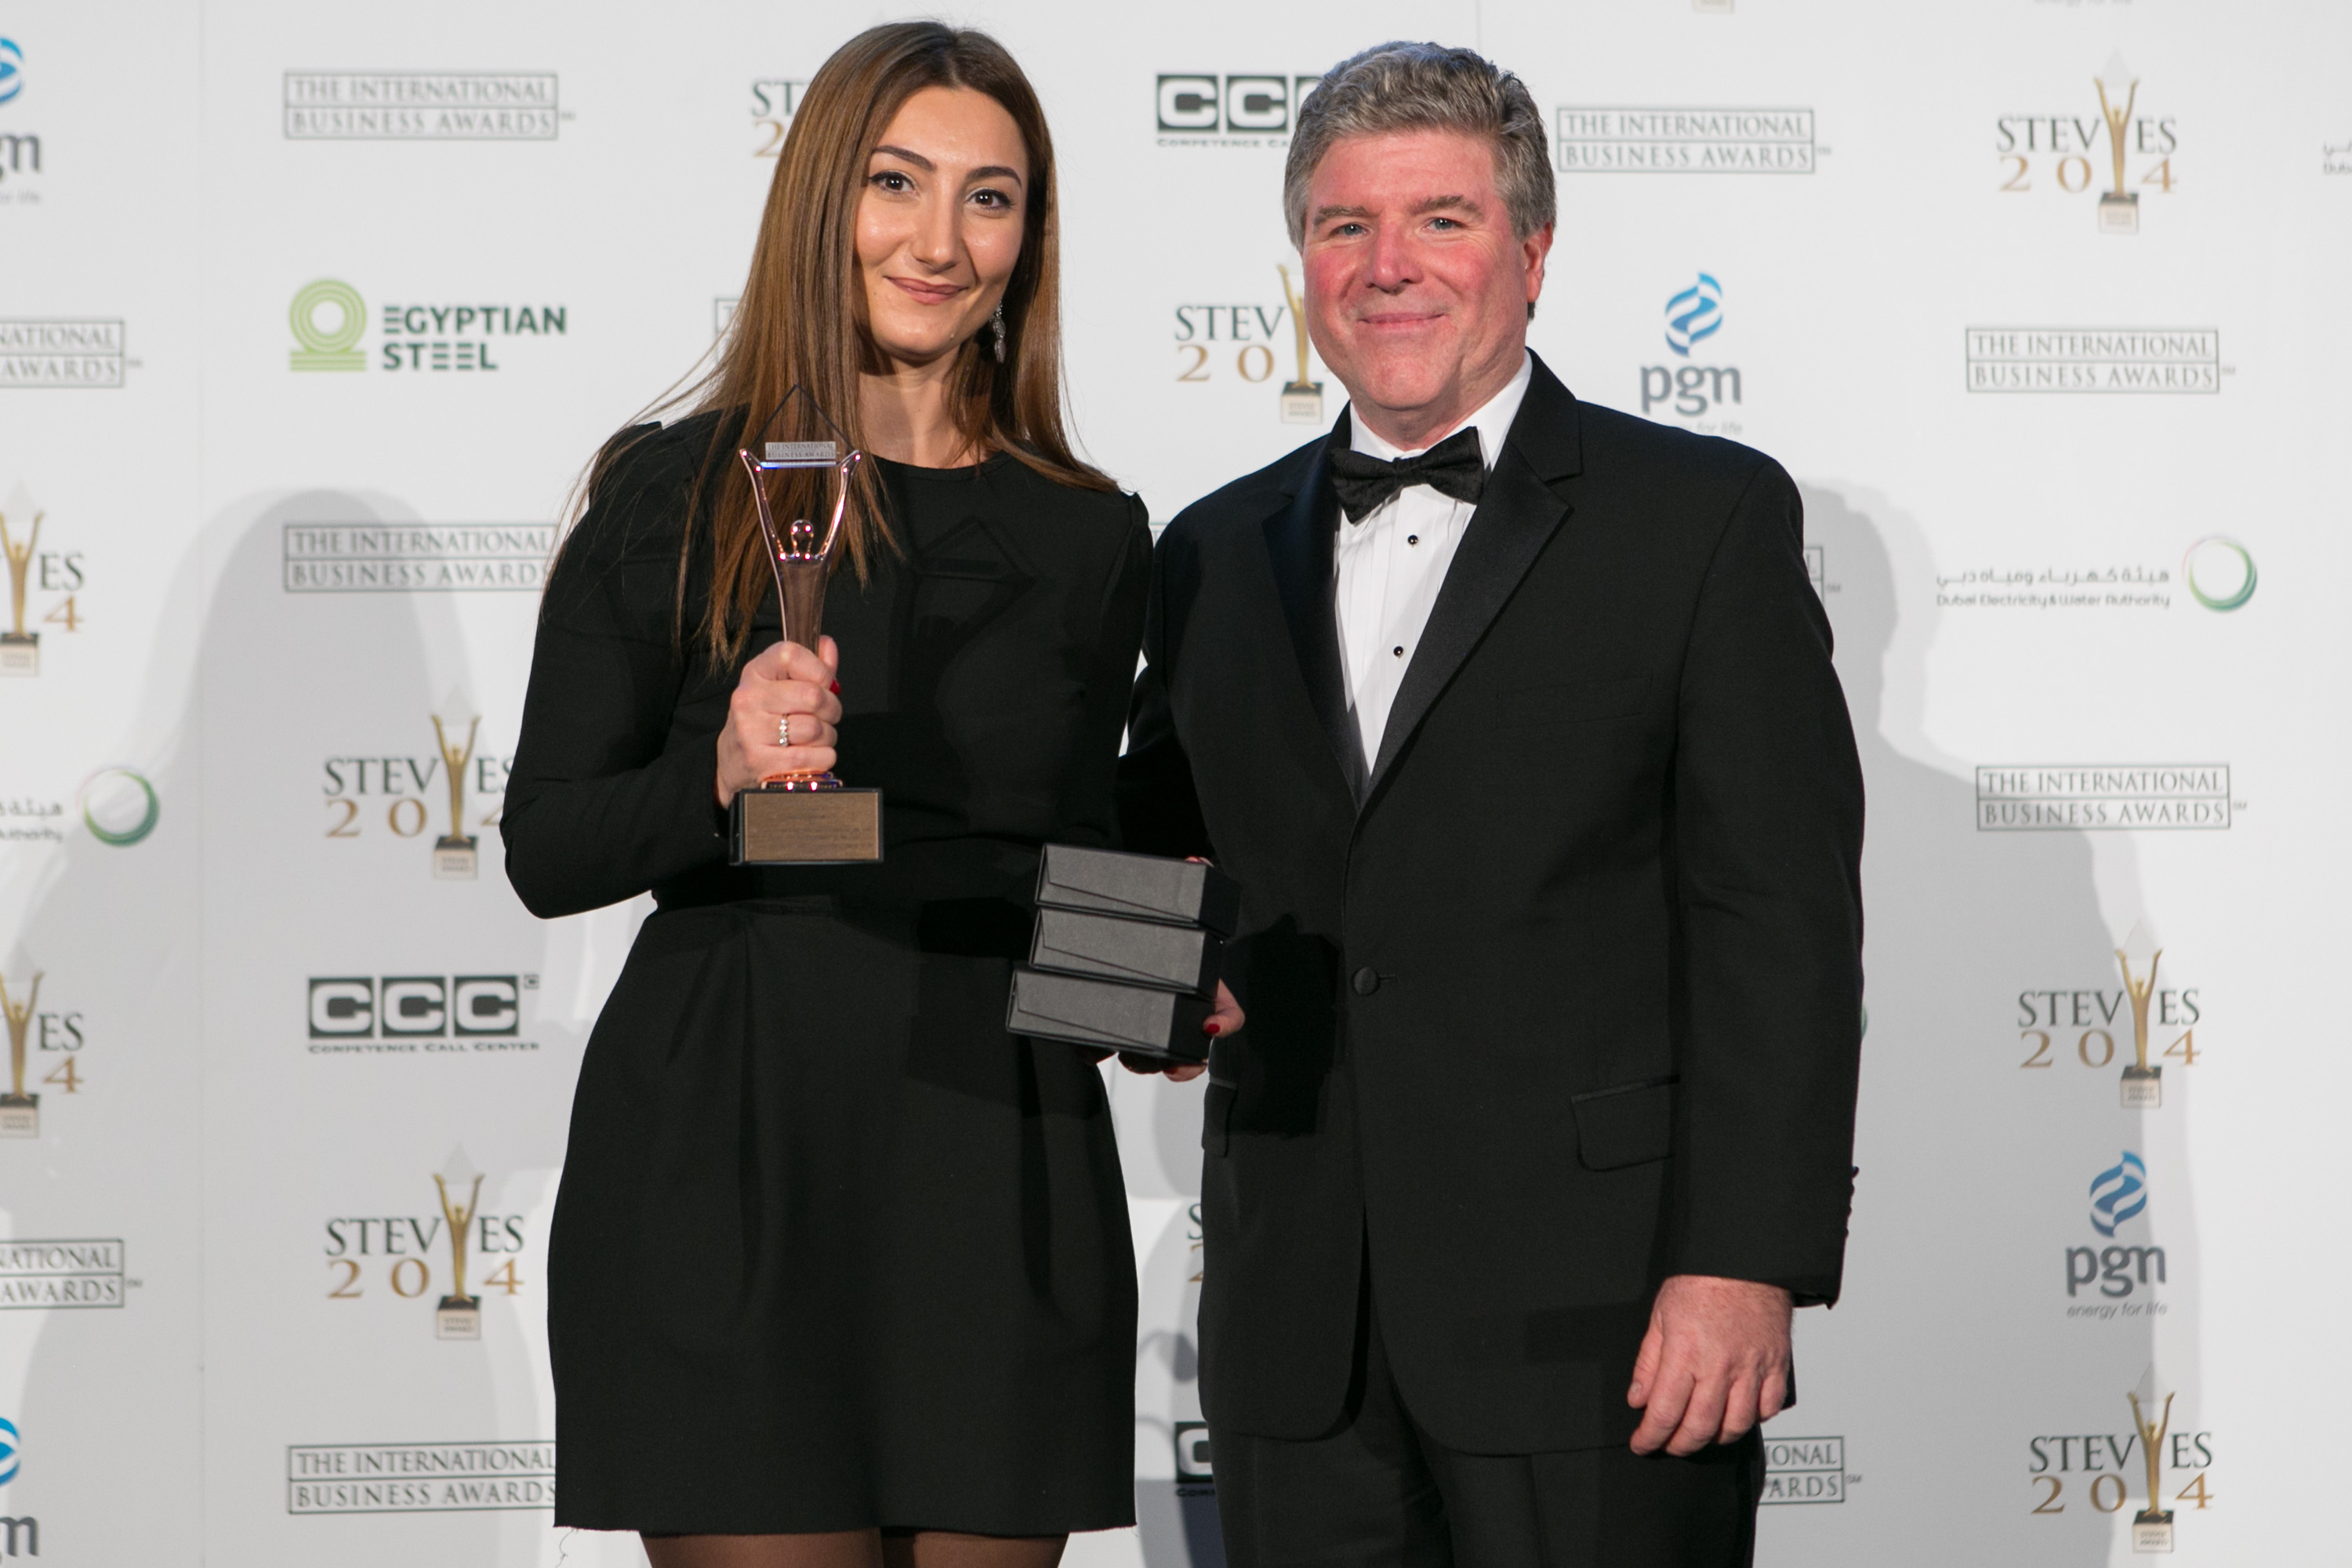 Azercell wins Int'l Business Award “Stevie”